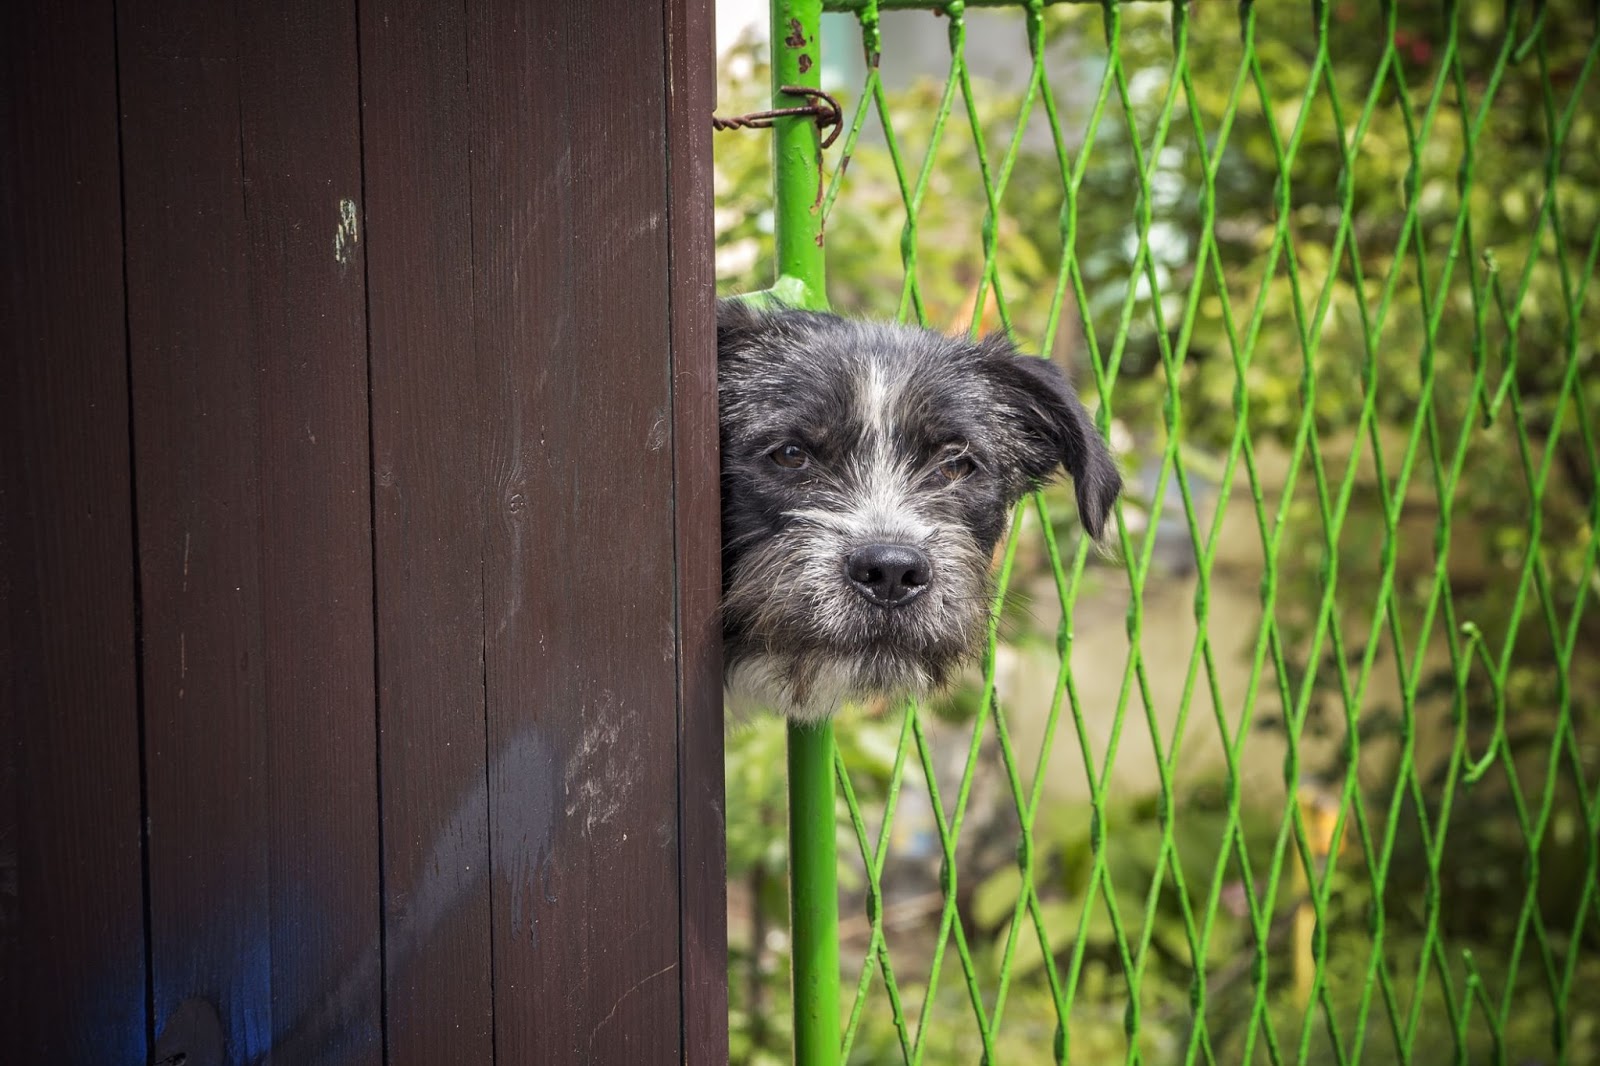 A dog is a nosey neighbor that pokes its head through a fence